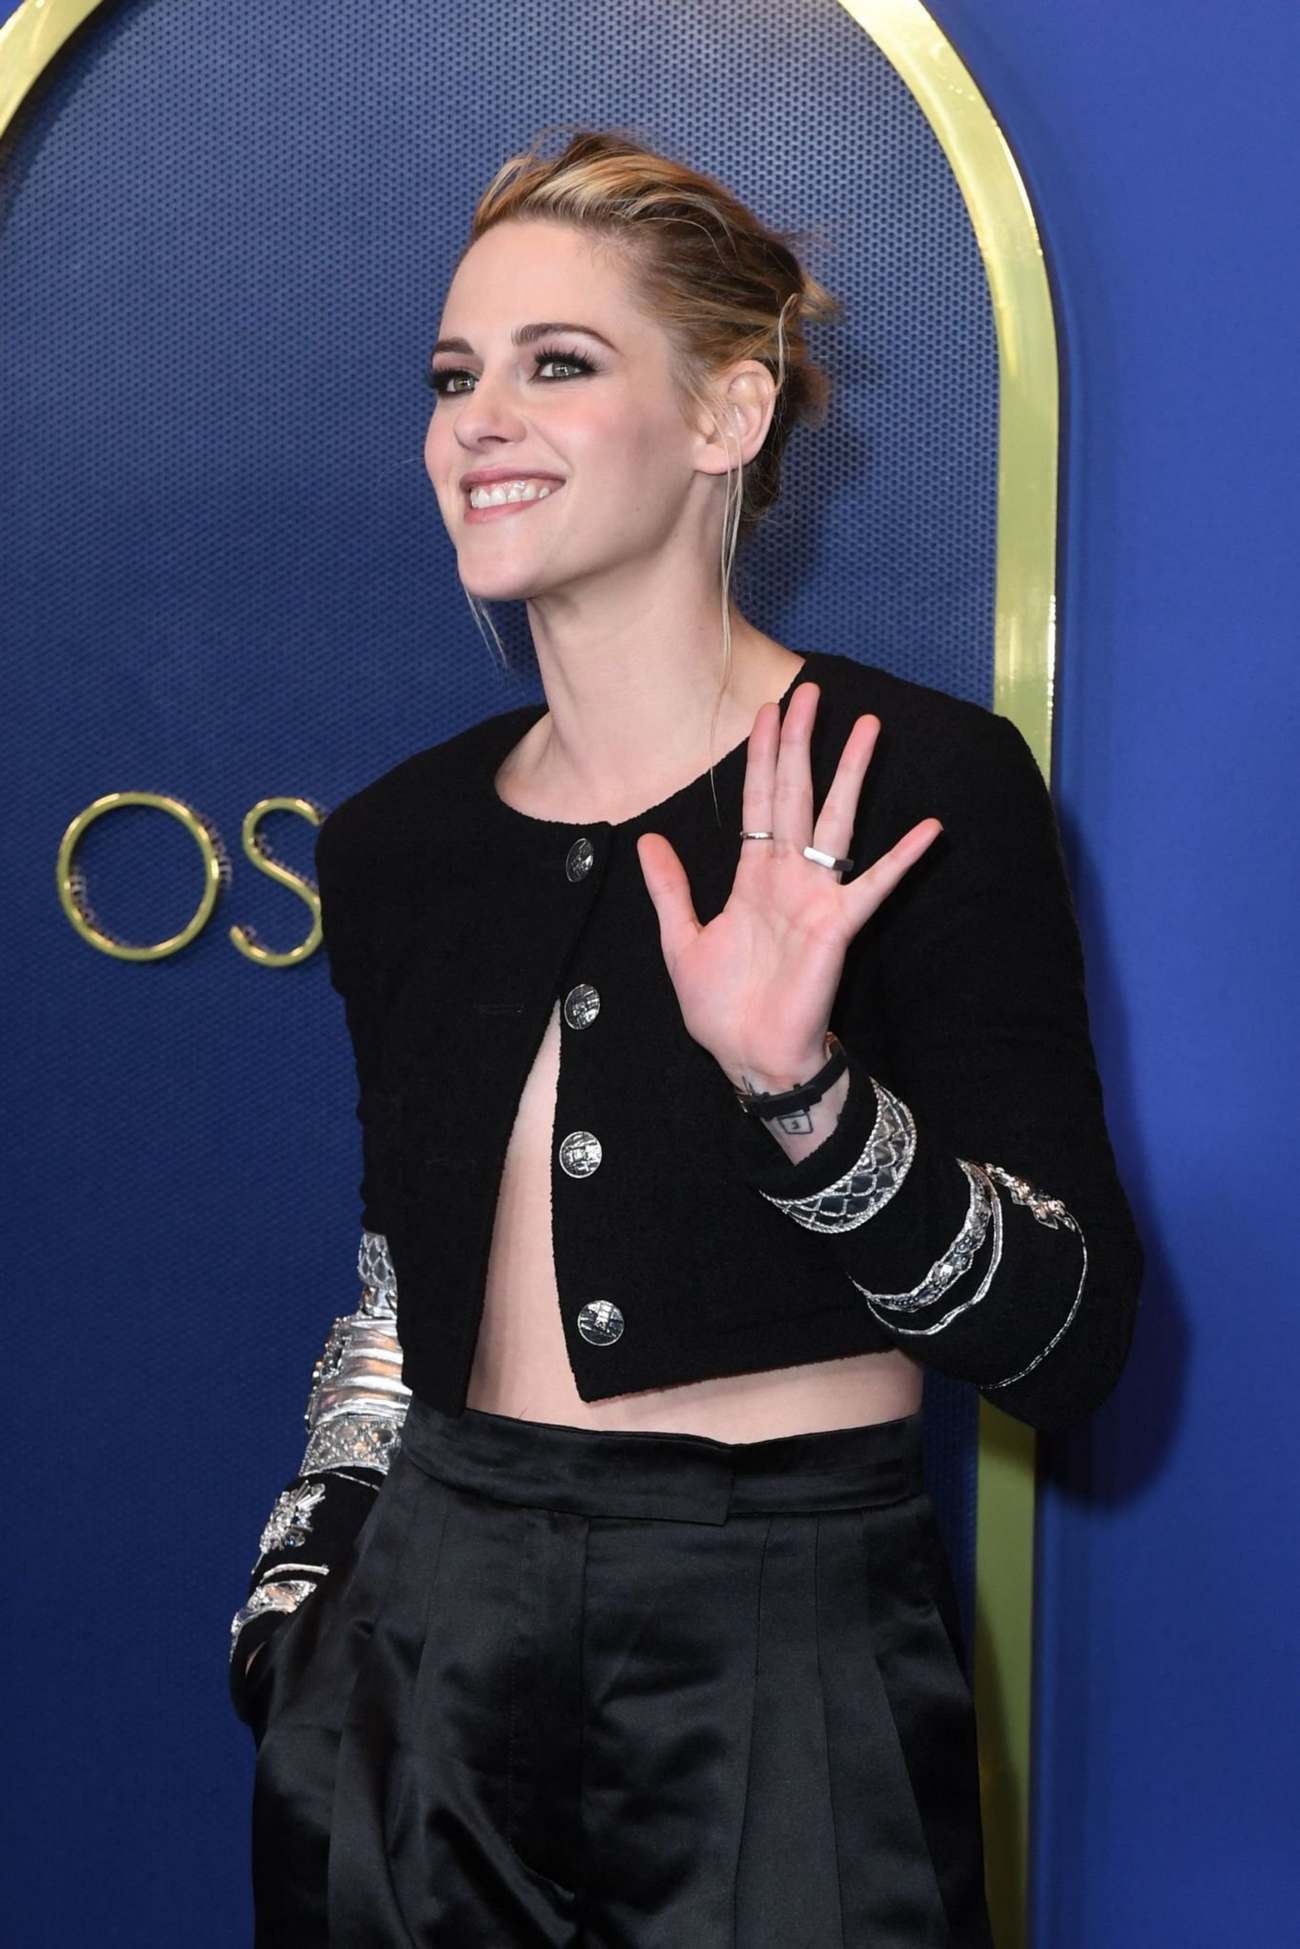 Interview: Kristen Stewart opens up about ‘Spencer,’ honoring Diana, awards season (she loves it) and the impact of being an openly queer Oscar nominee in 2022